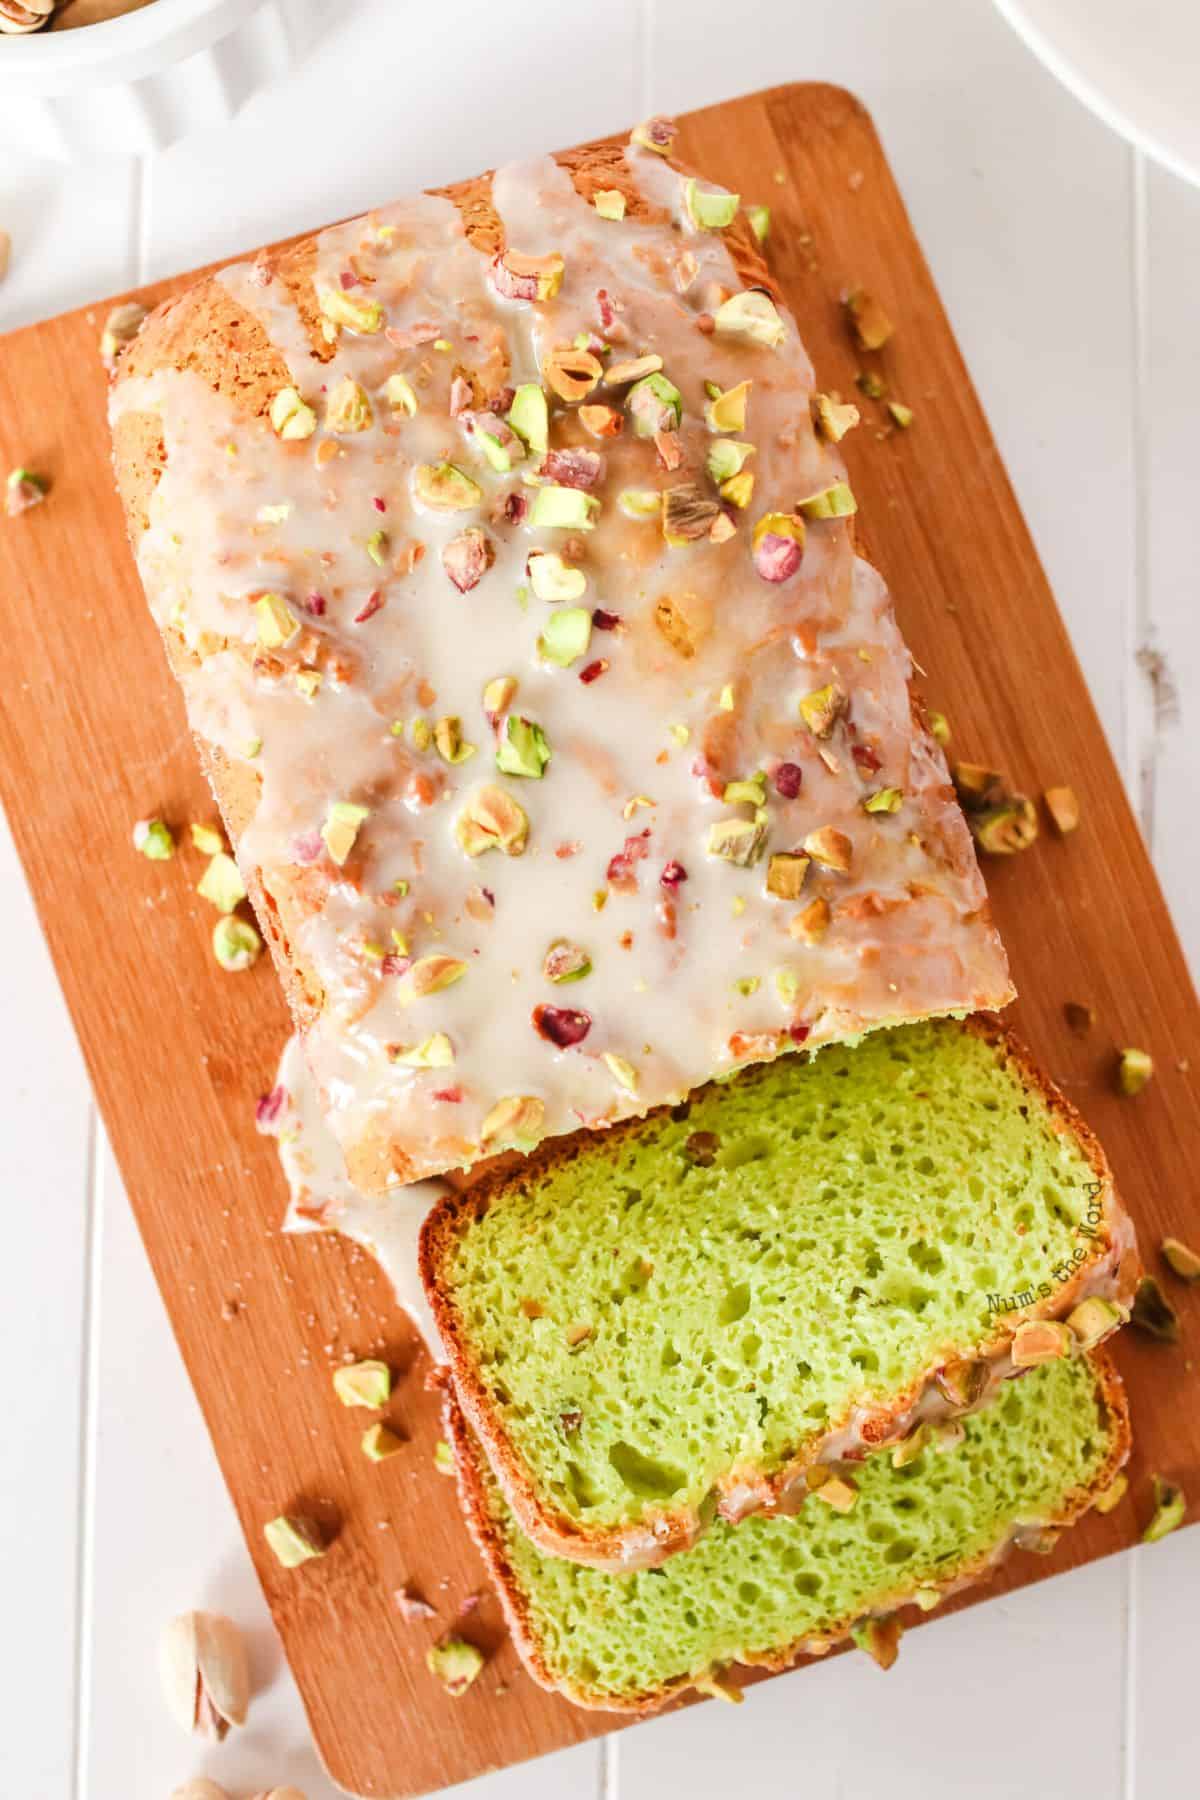 Partialy sliced Pistachio Bread on a wooden cutting board.